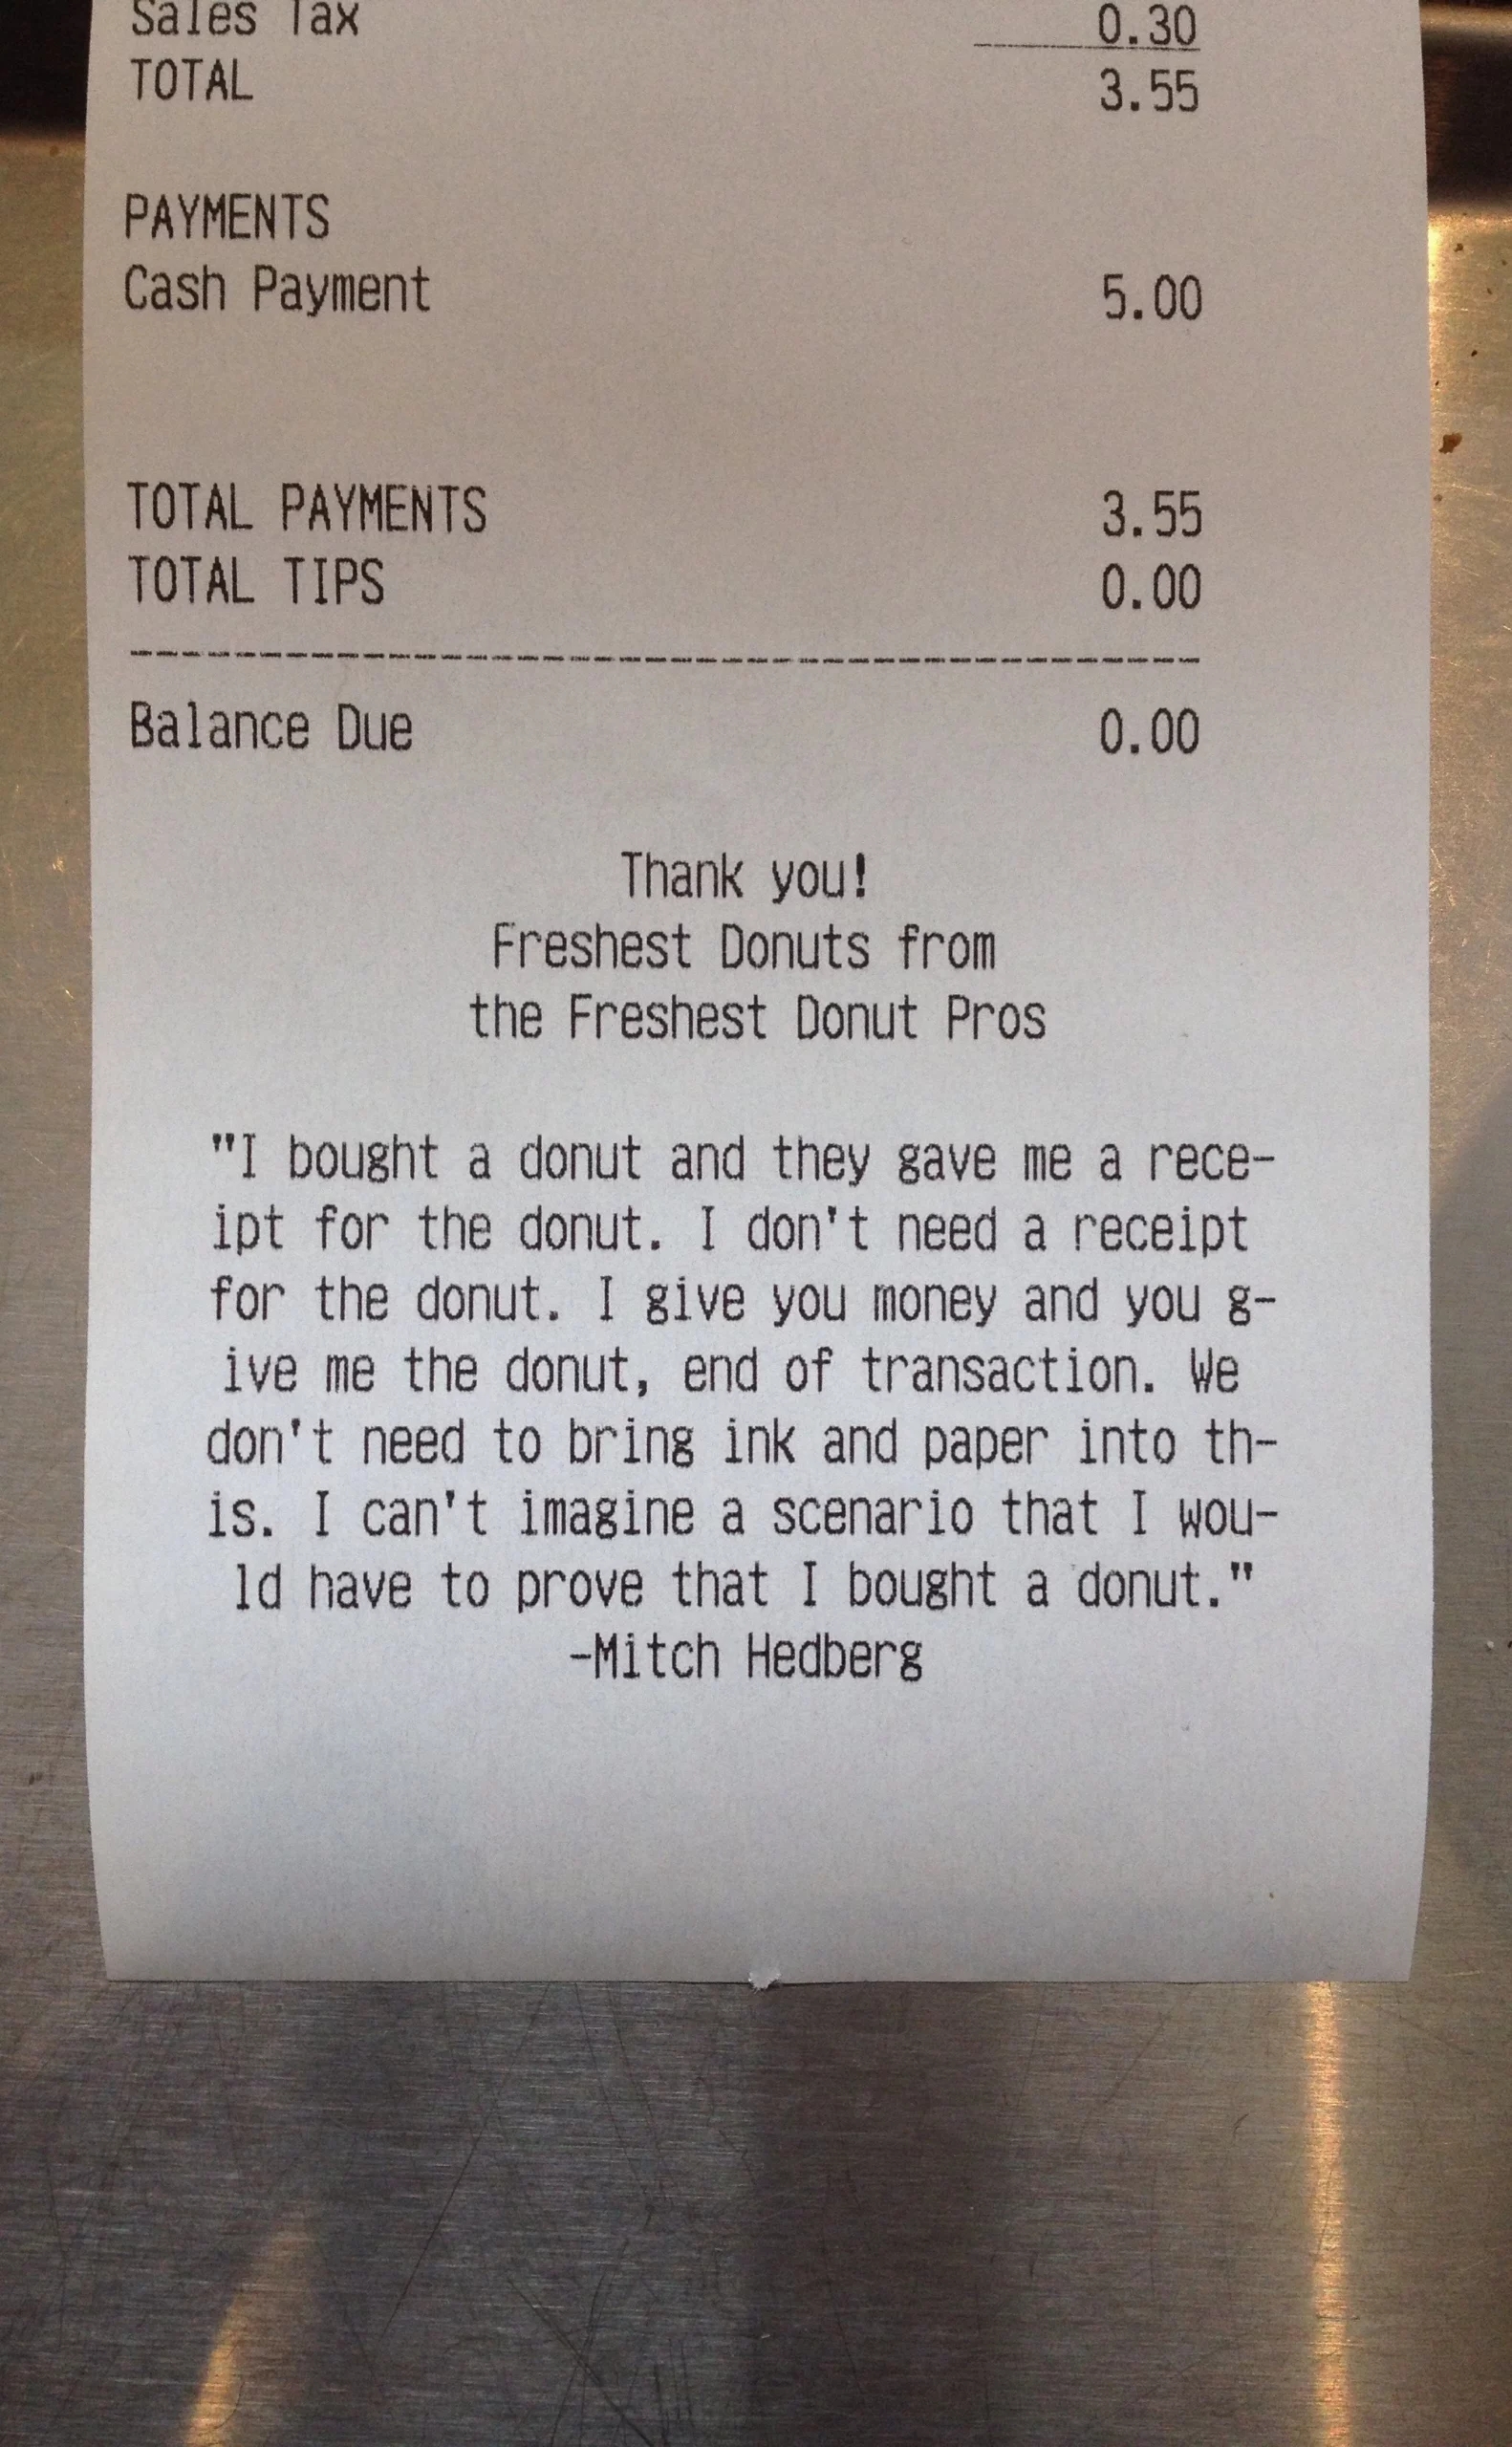 Receipt that says: “I bought a doughnut and they gave me a receipt for the doughnut; I don't need a receipt for the doughnut. I'll just give you the money, and you give me the doughnut, end of transaction. We don't need to bring ink and paper into this. I just can't imagine a scenario where I would have to prove that I bought a doughnut.”-Mitch Hedberg